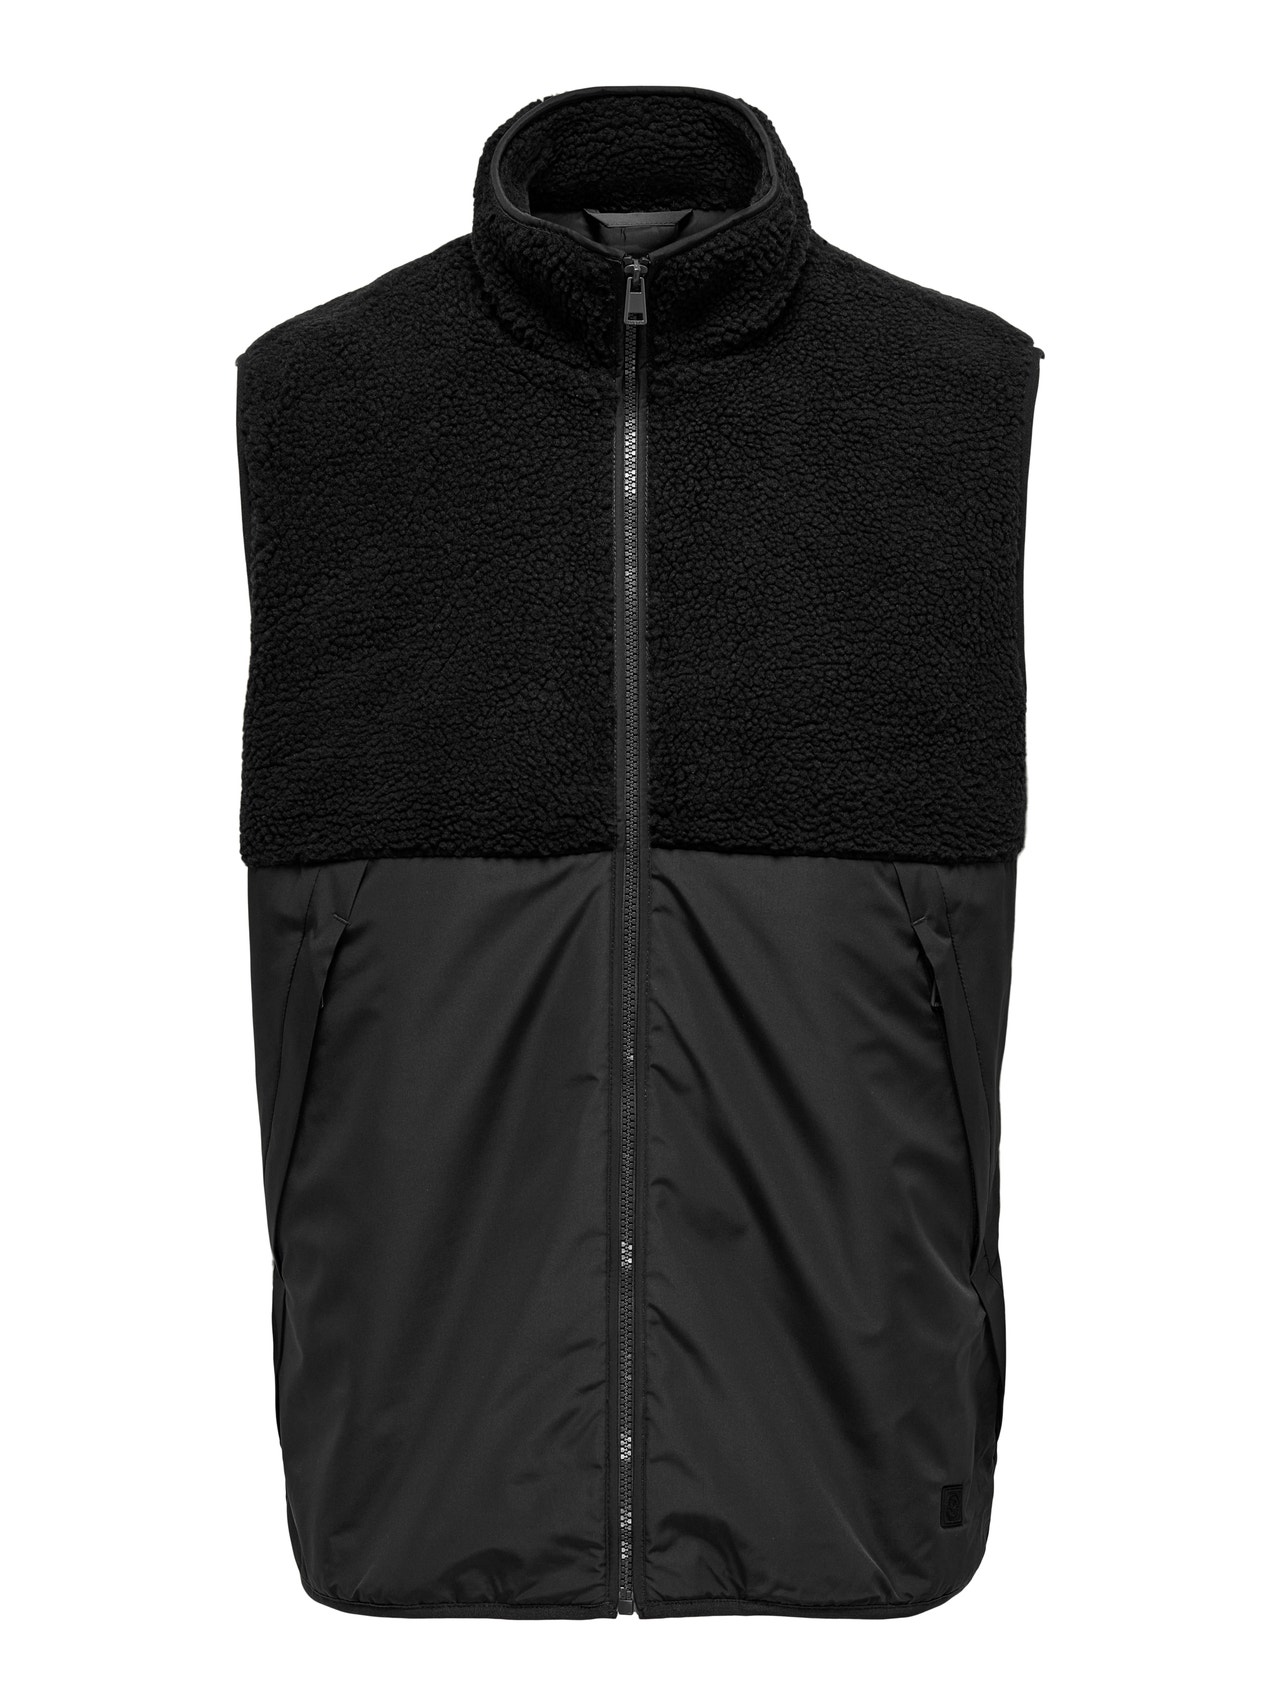 ONLY & SONS Sherpa mix waistcoat -Black - 22022513